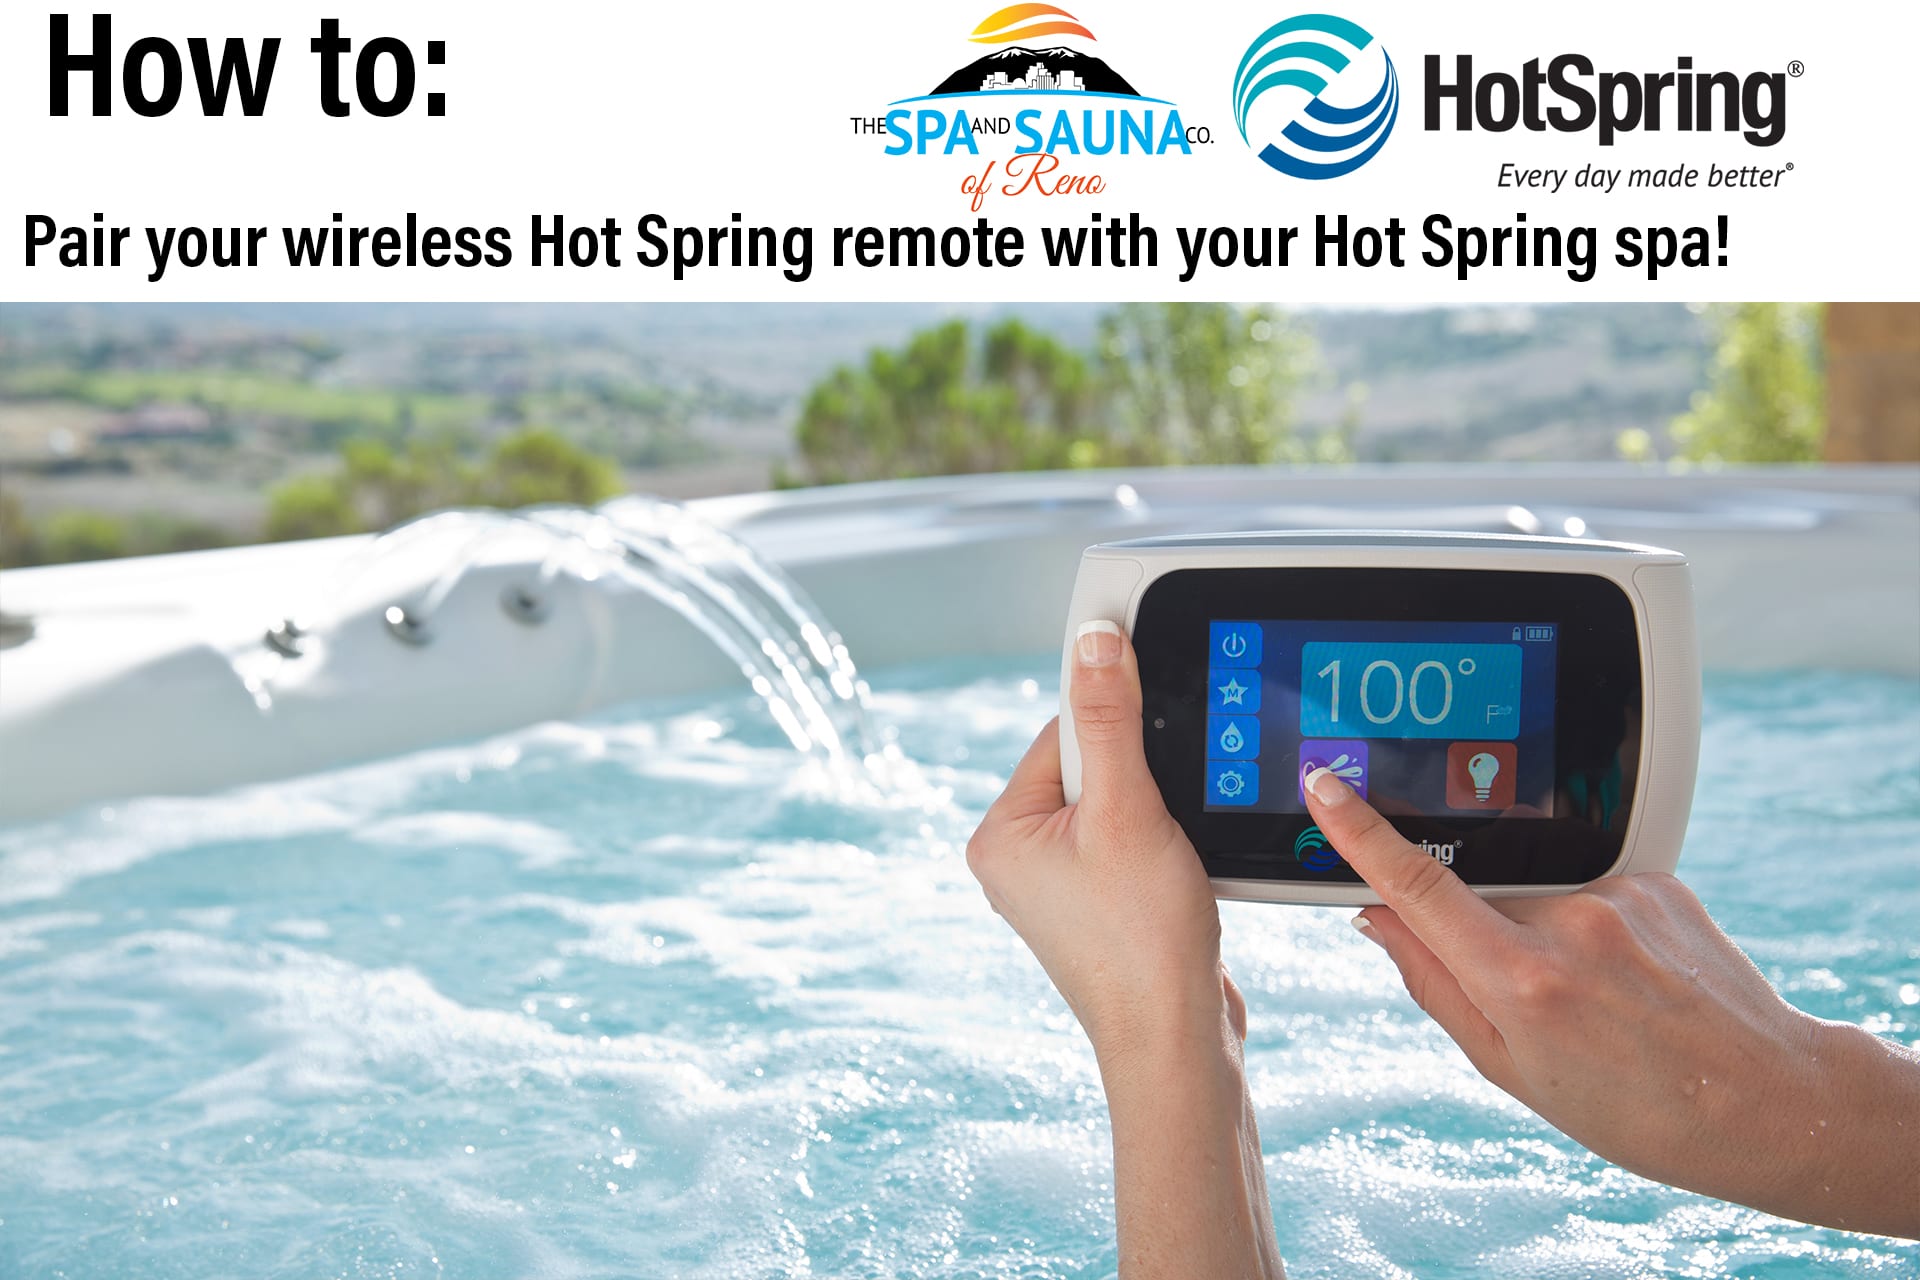 How to Pair Your Hot Spring Remote with Your Hot Spring Spa